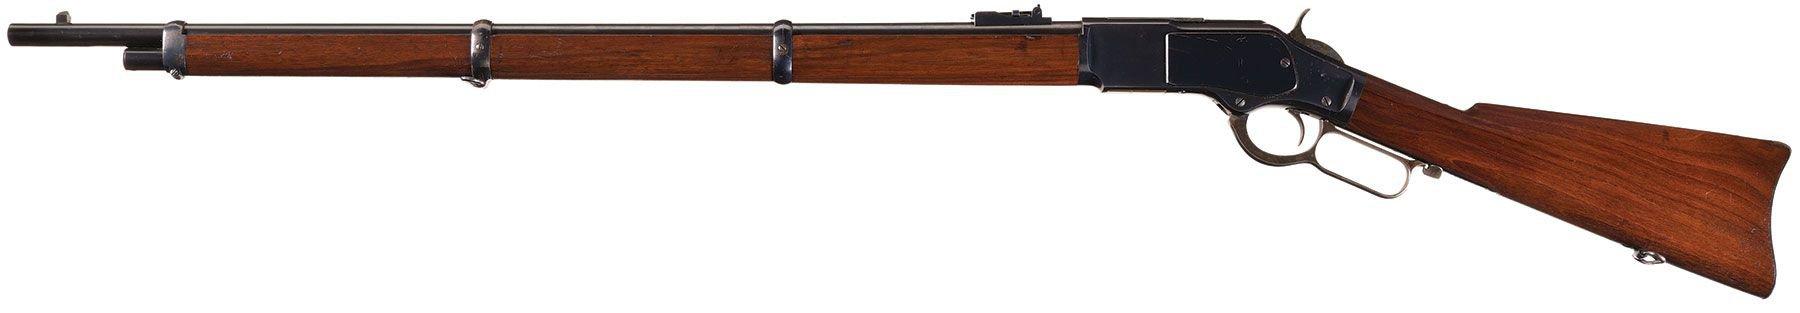 Excellent Winchester Model 1873 Musket